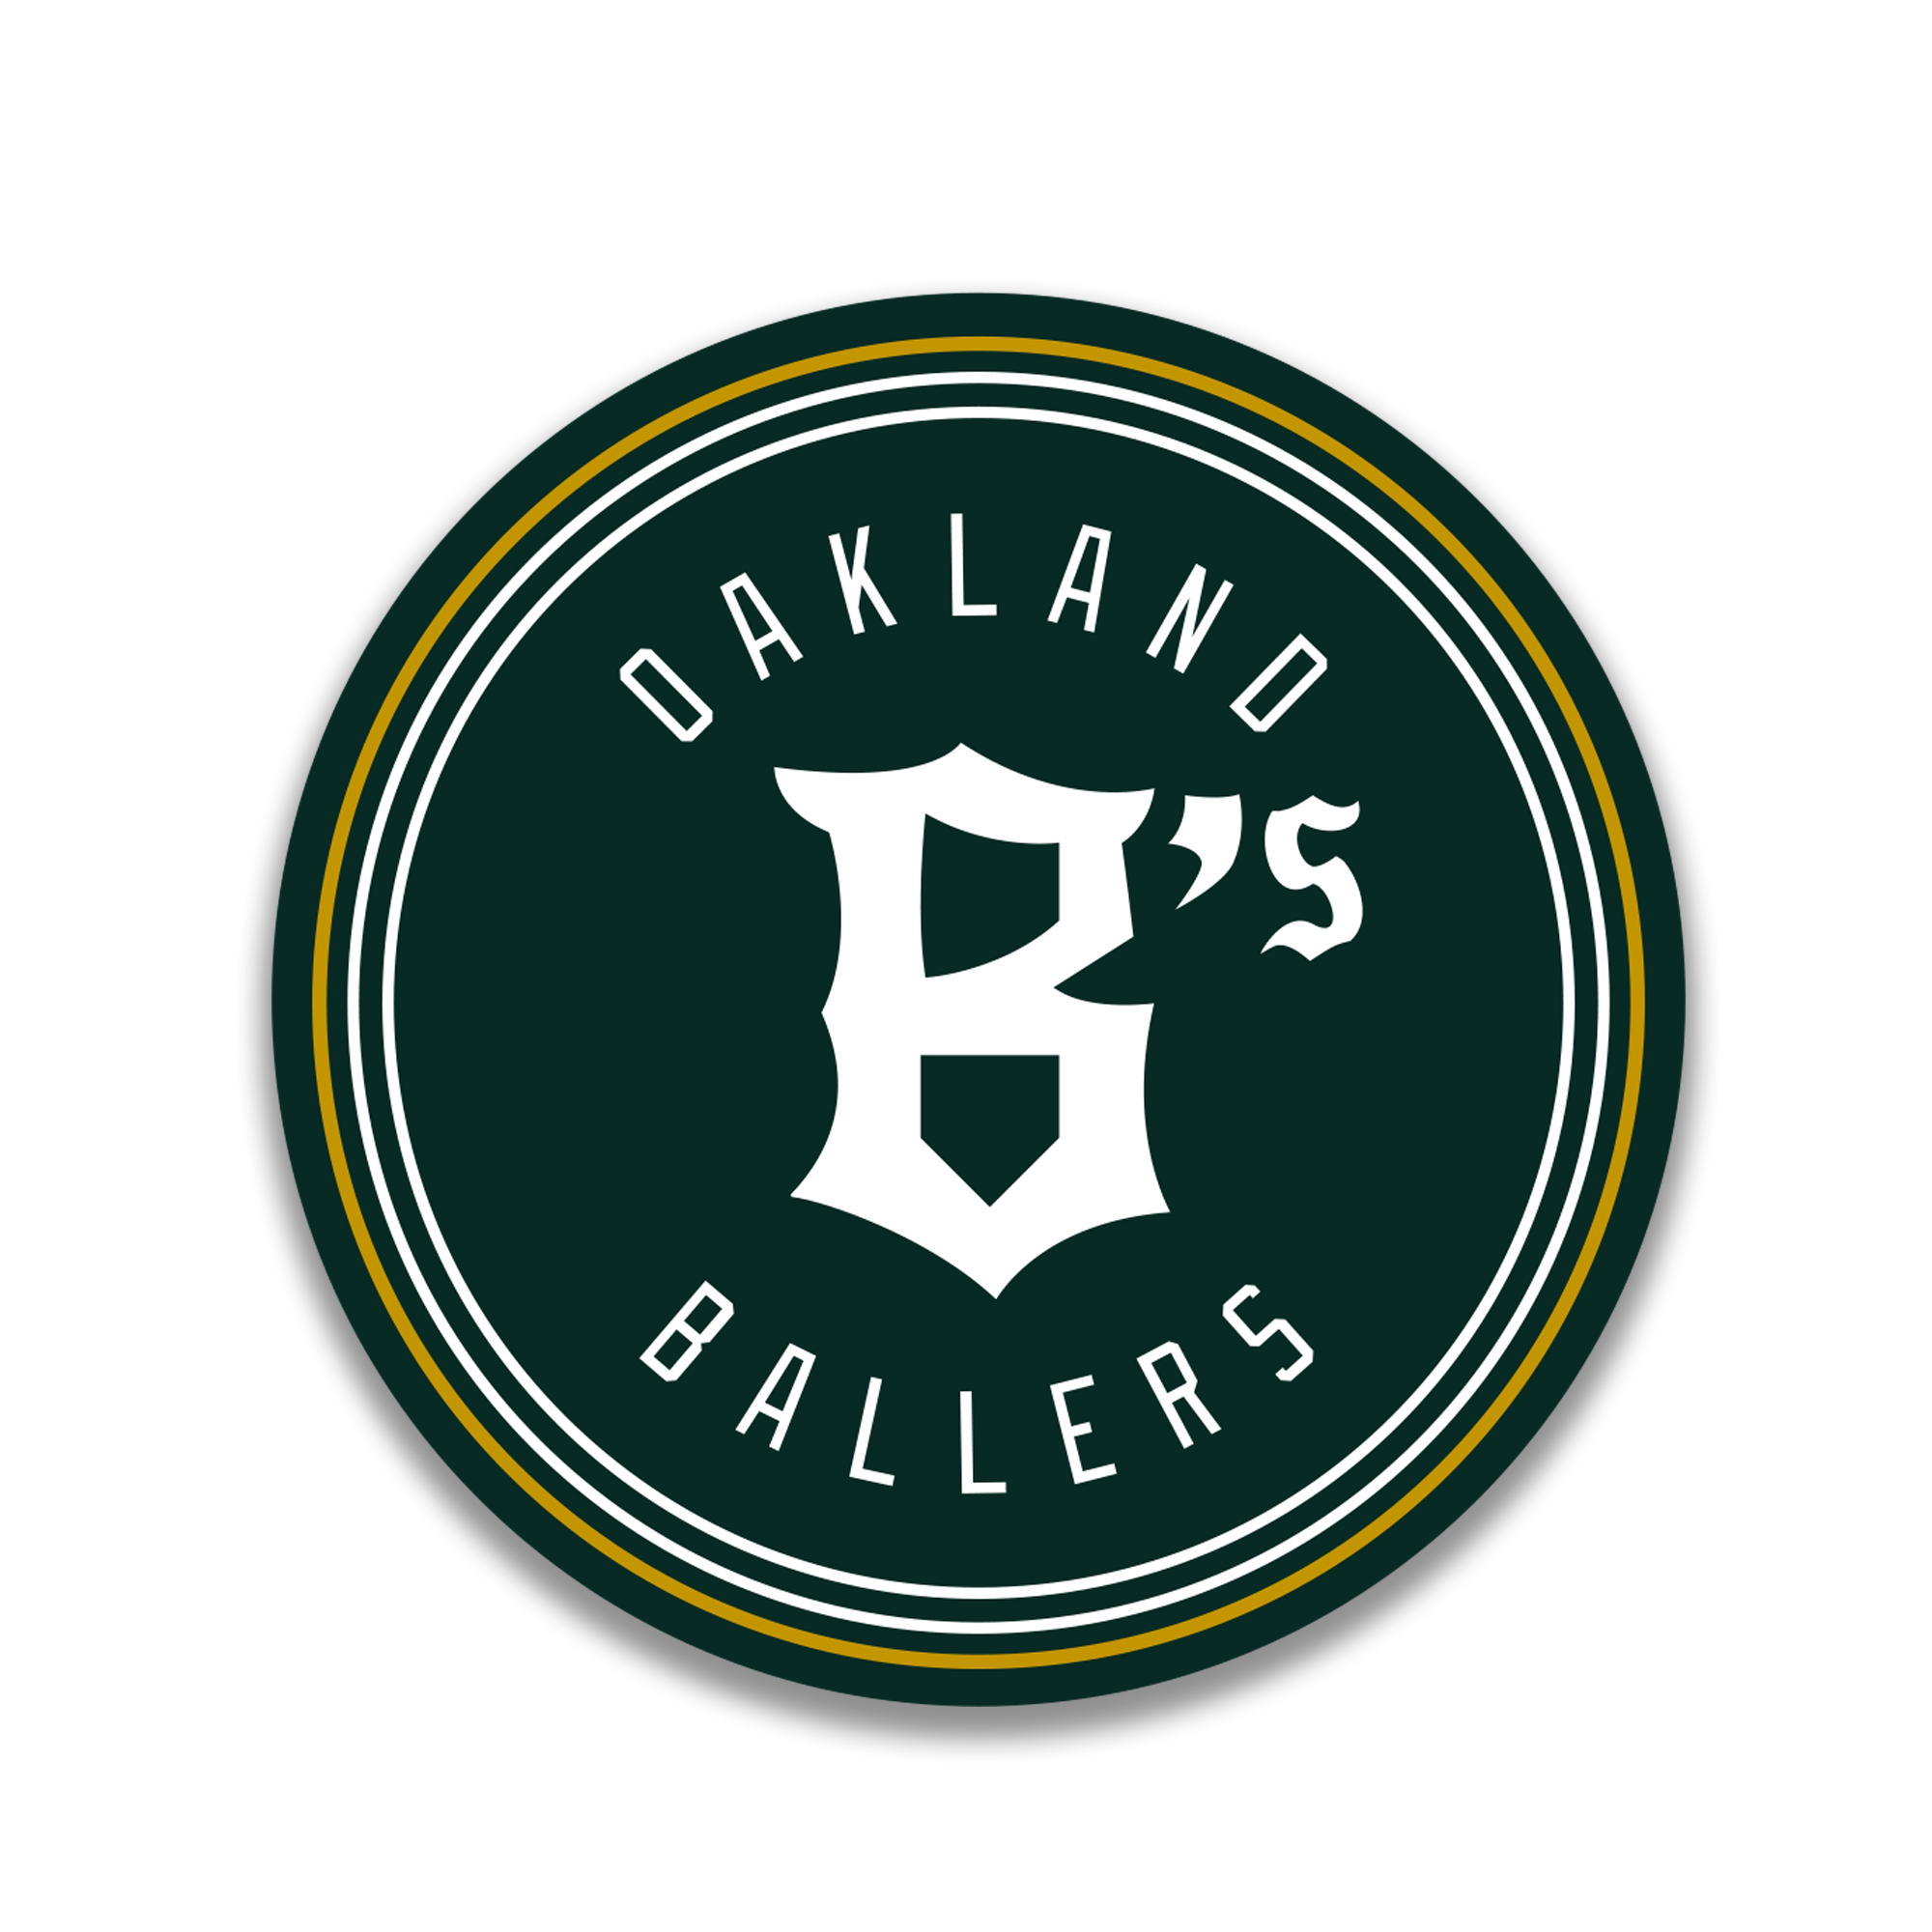 Round Oakland Ballers sticker in forest green, white, and yellow.